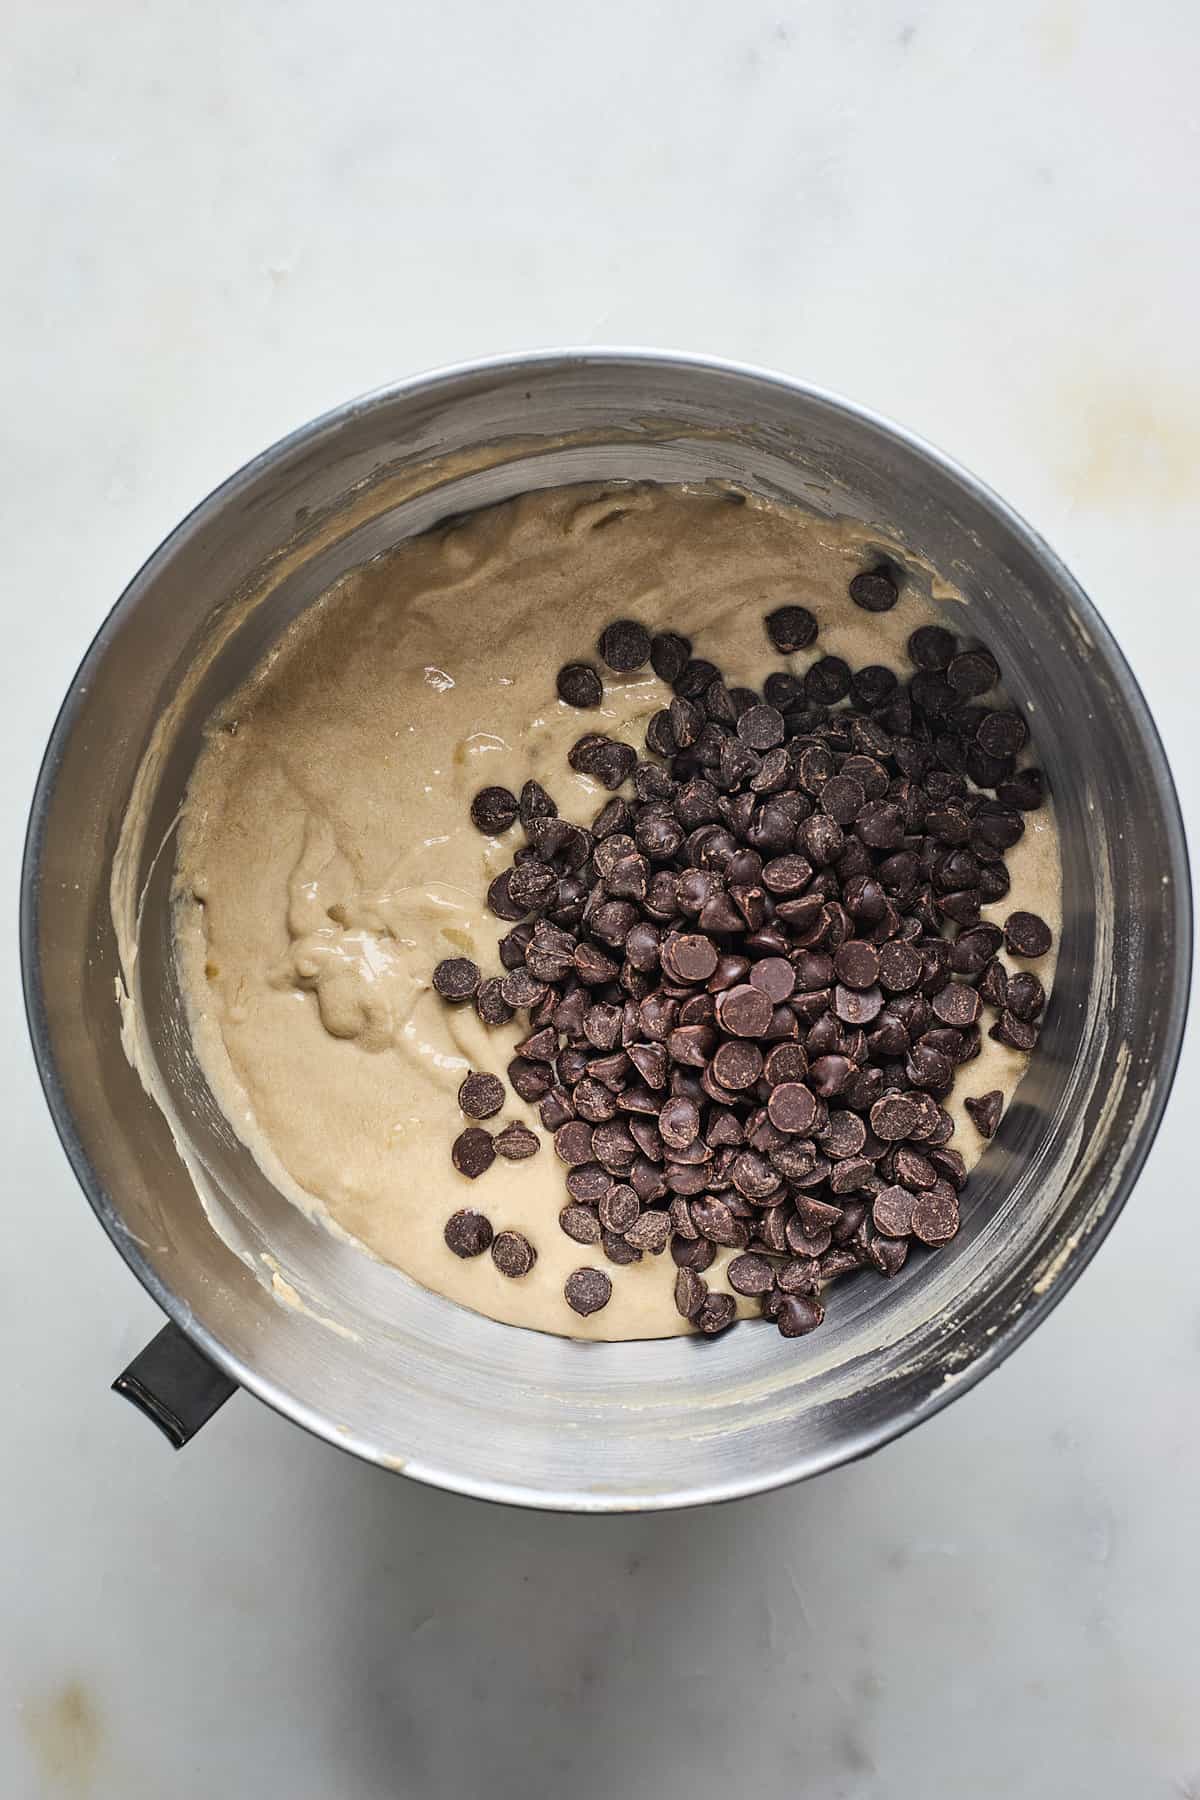 A chocolate banana bread batter with chocolate chips on top before mixing together